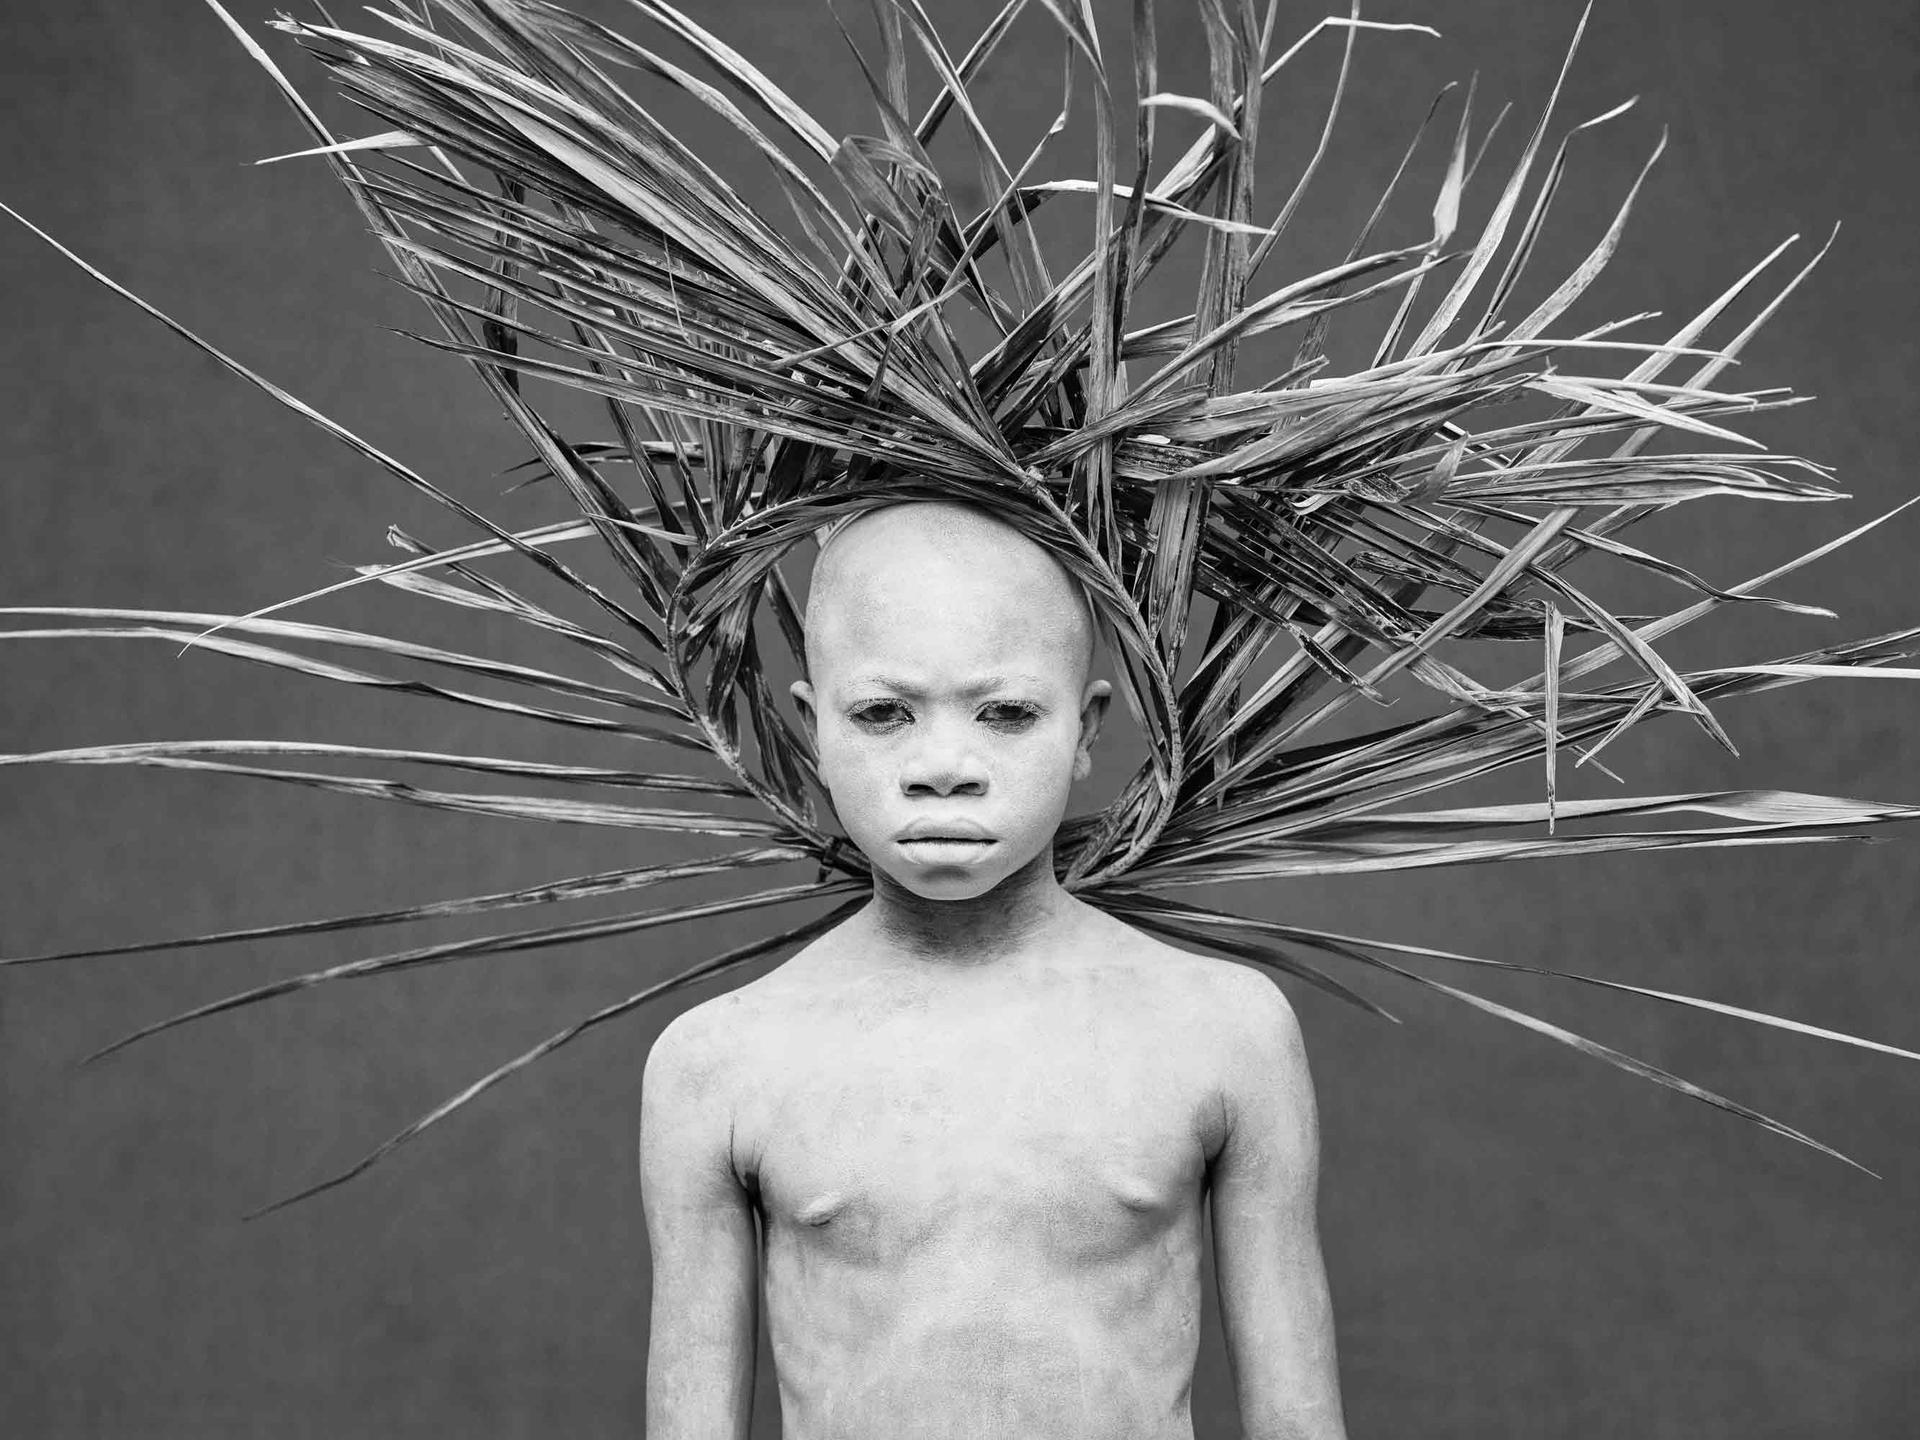 A boy whose body is painted white wears a crown of wooden sticks that looks like a sunburst behind his head poses for a photo